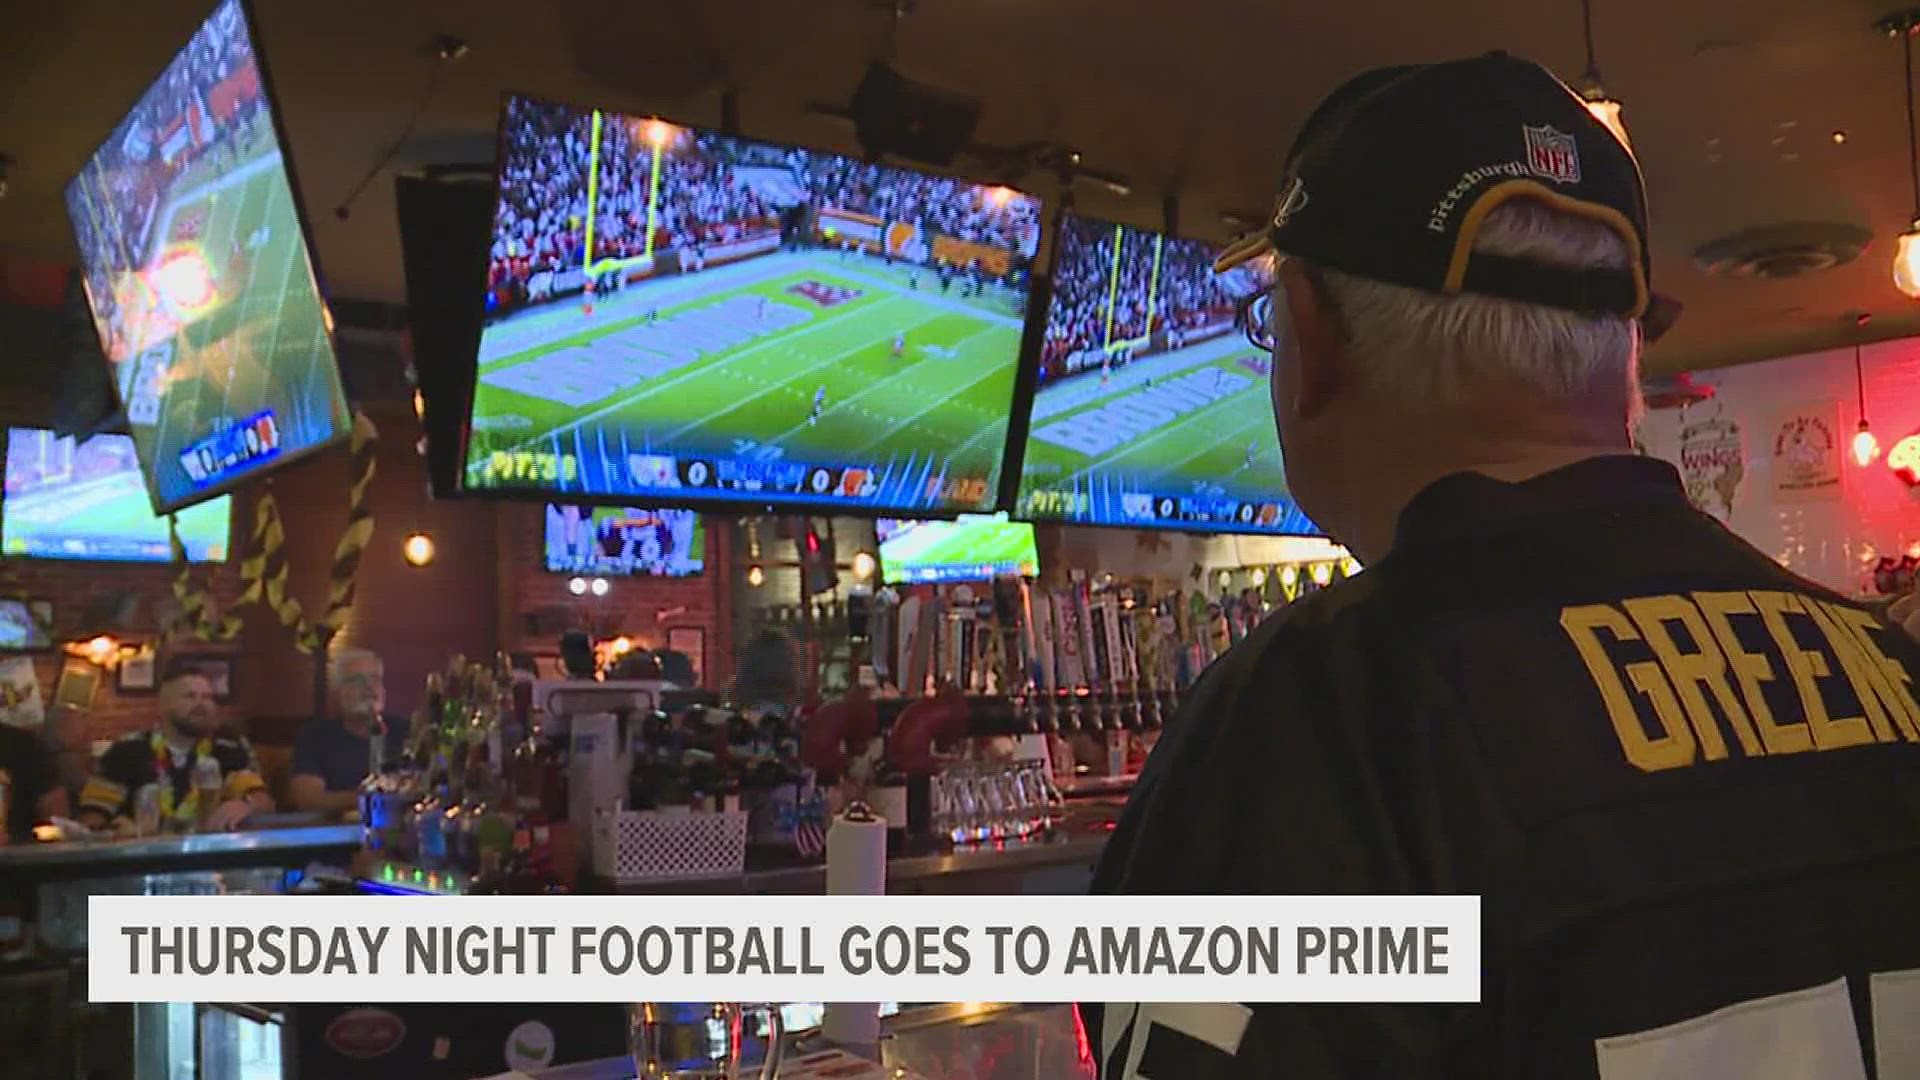 Local football fans give mixed reactions to the streaming giant's new broadcast deal for Thursday Night Football.